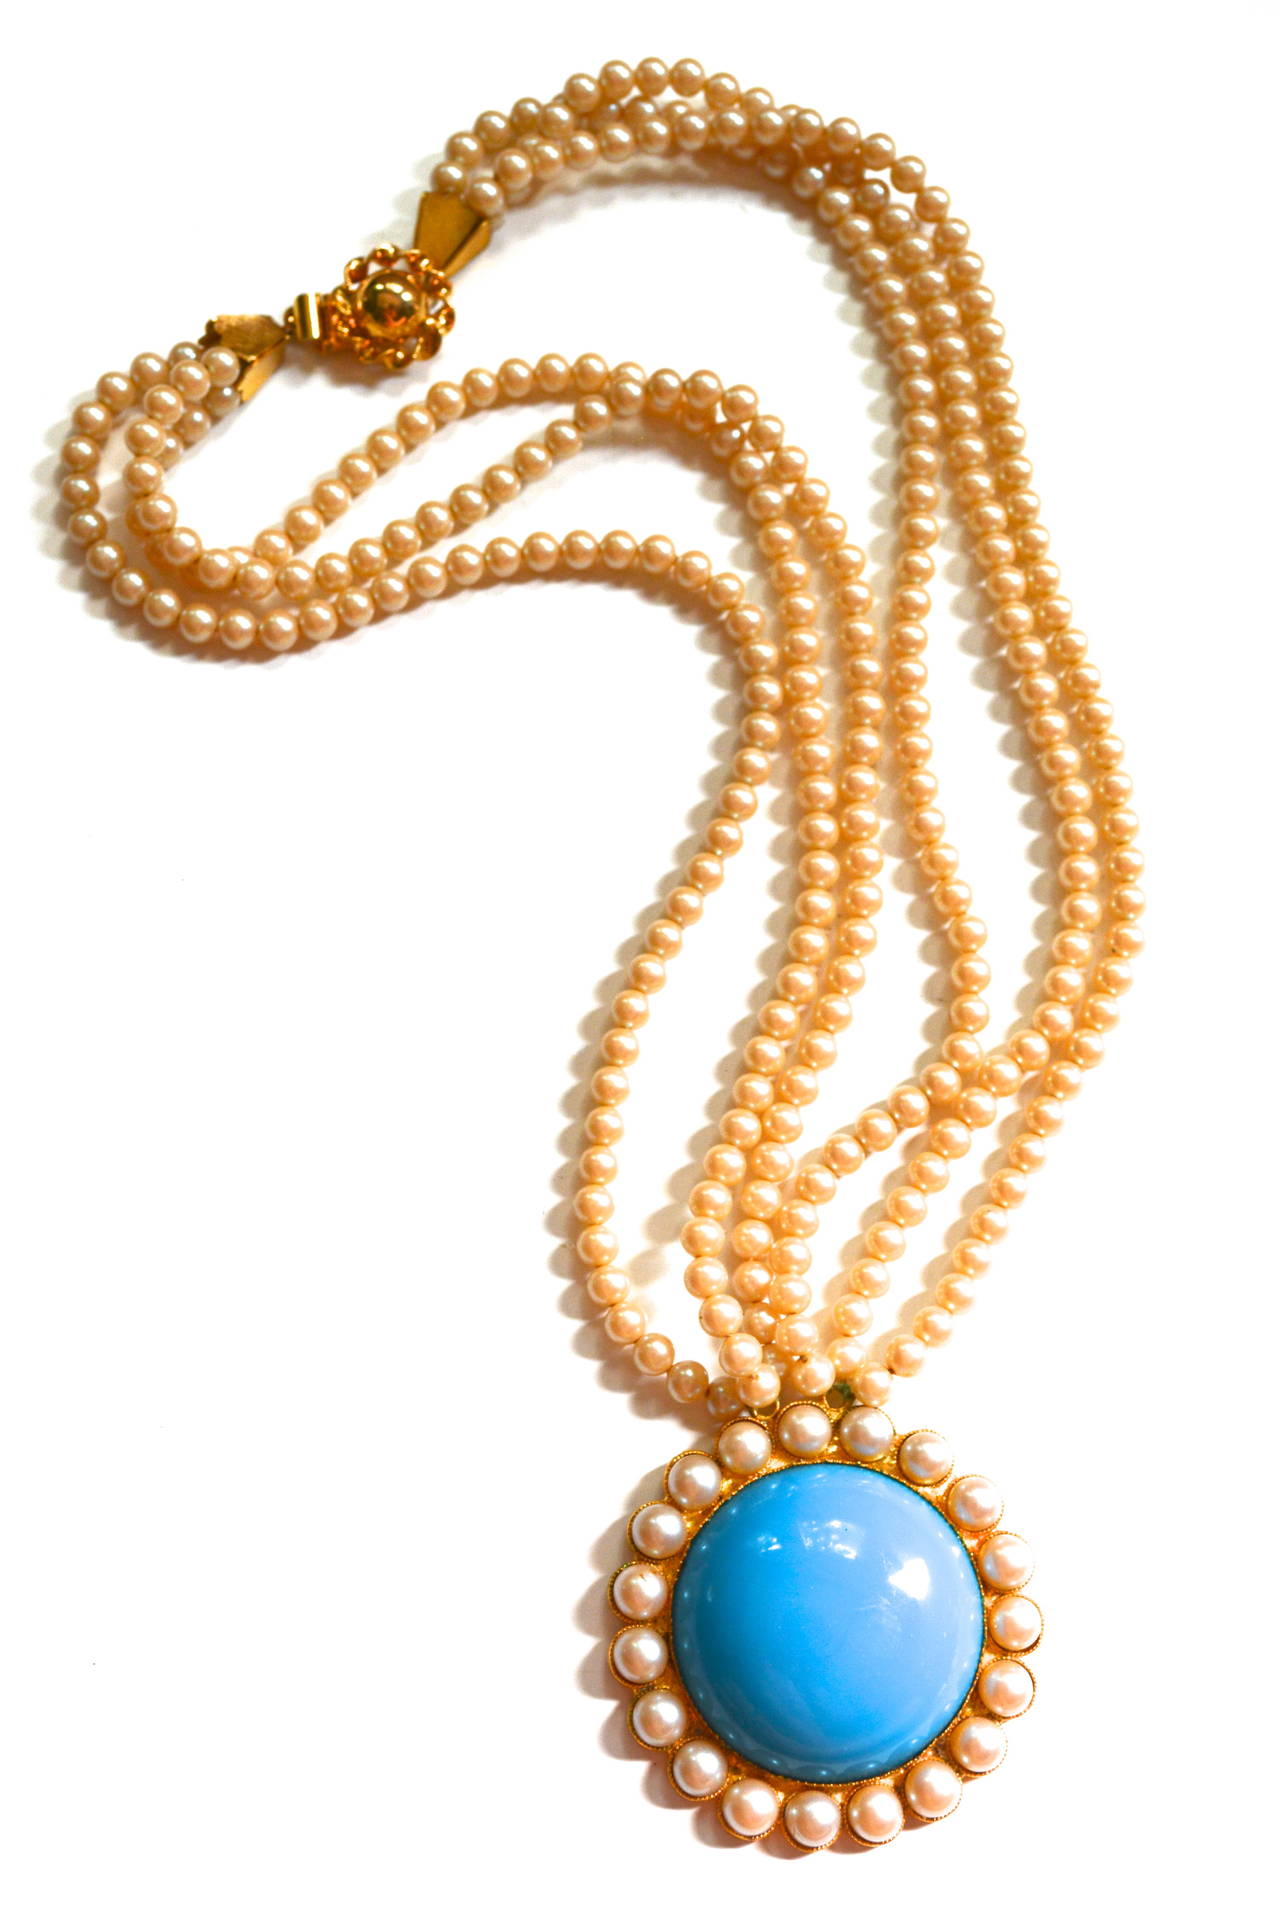 Signed William de Lillo multi strand costume pearl bead necklace. Wonderful glass turquoise cabochon.  The pendant is 2